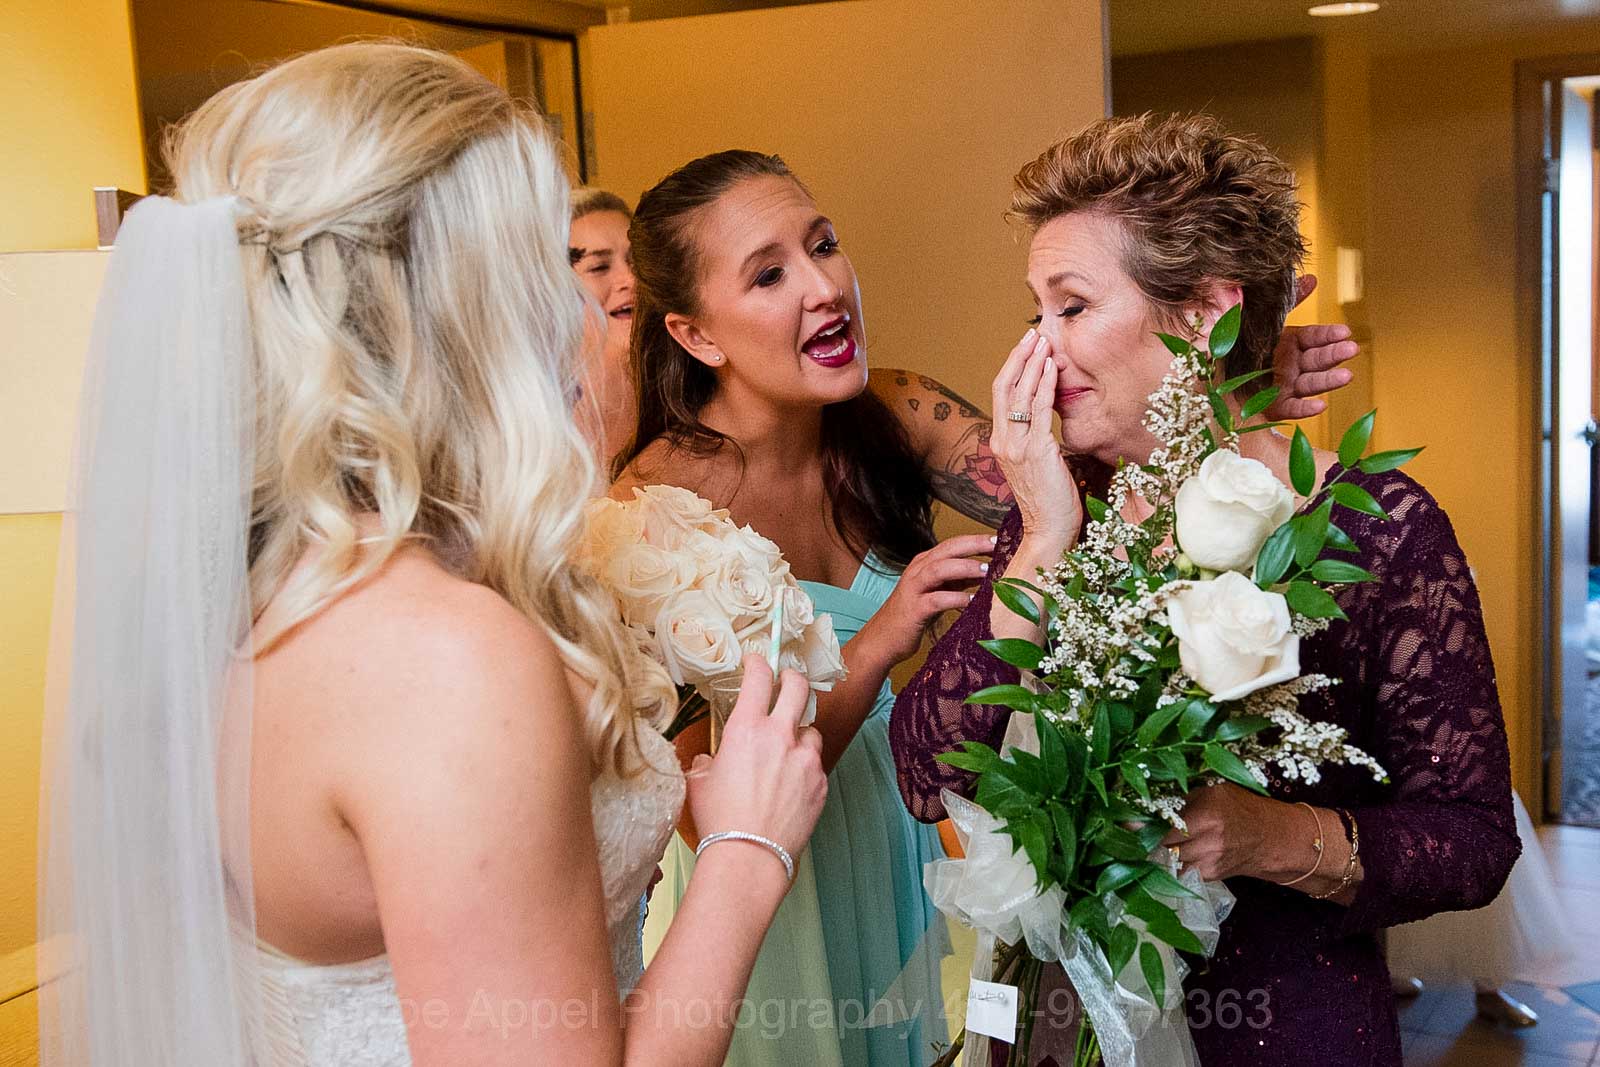 Bridesmaids and a bride comfort the bride's mother as she cries on seeing her daughter.